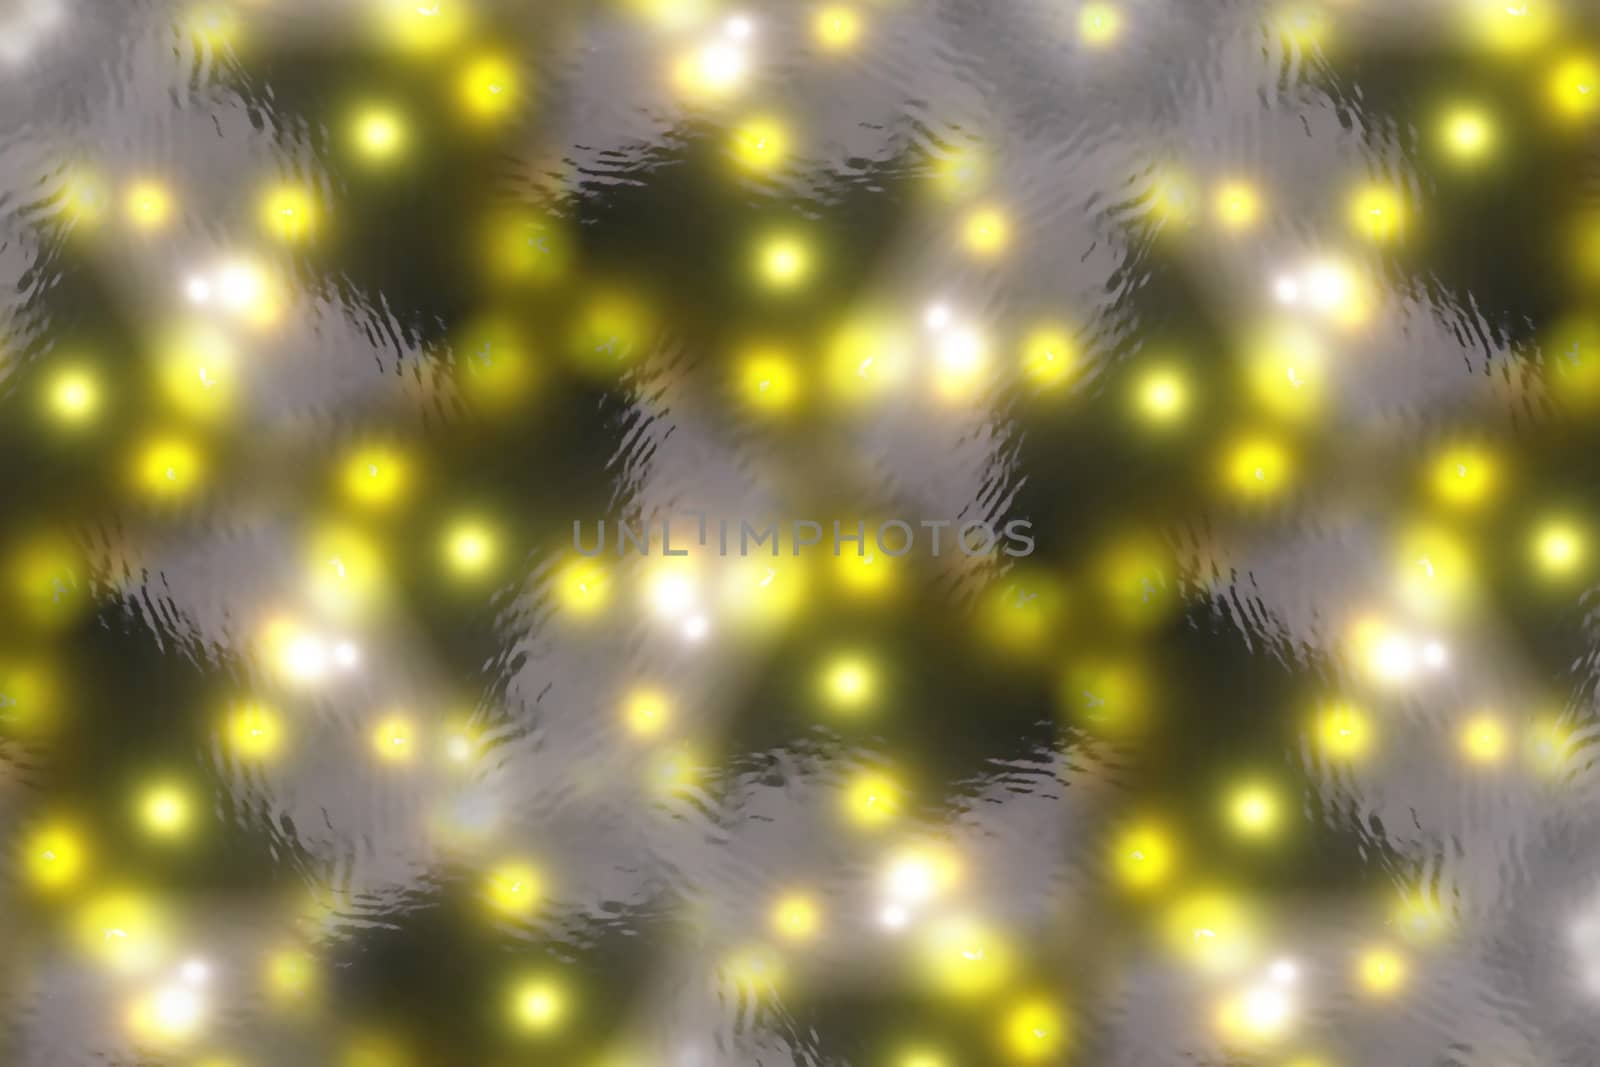 
Abstract mosaic blurred background in the form of yellow and white lights on the water ripples
	